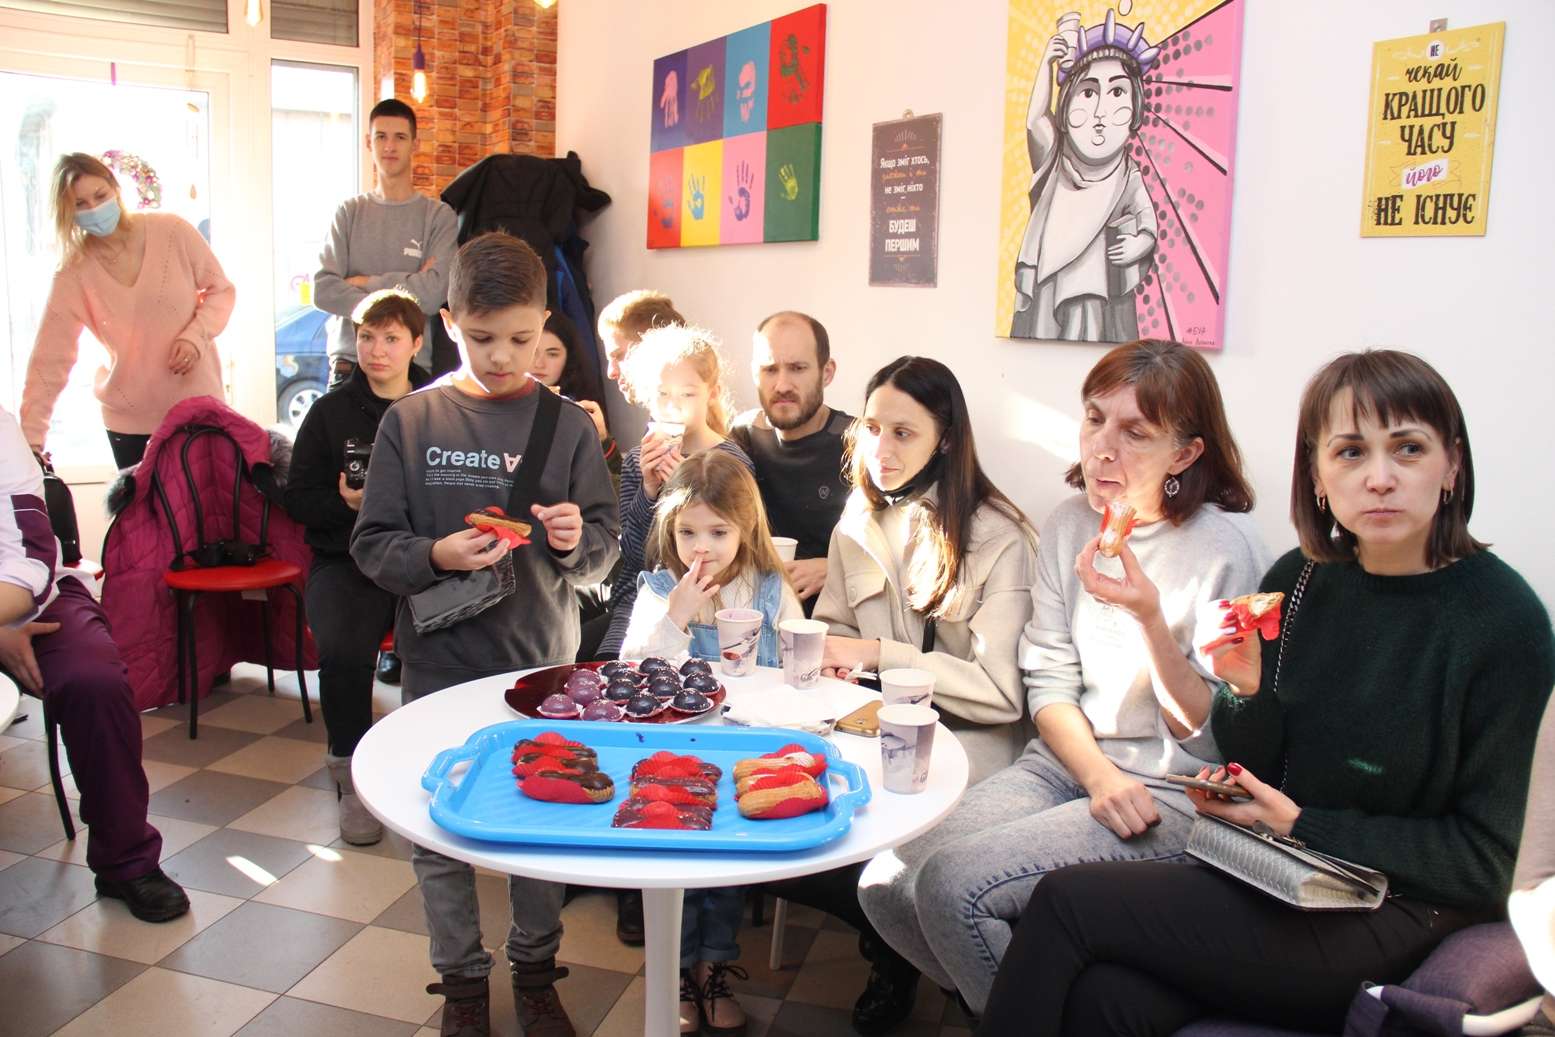 The Medical Aid Committee in Zakarpattia supported the work of an inclusive confectionery in Uzhhorod